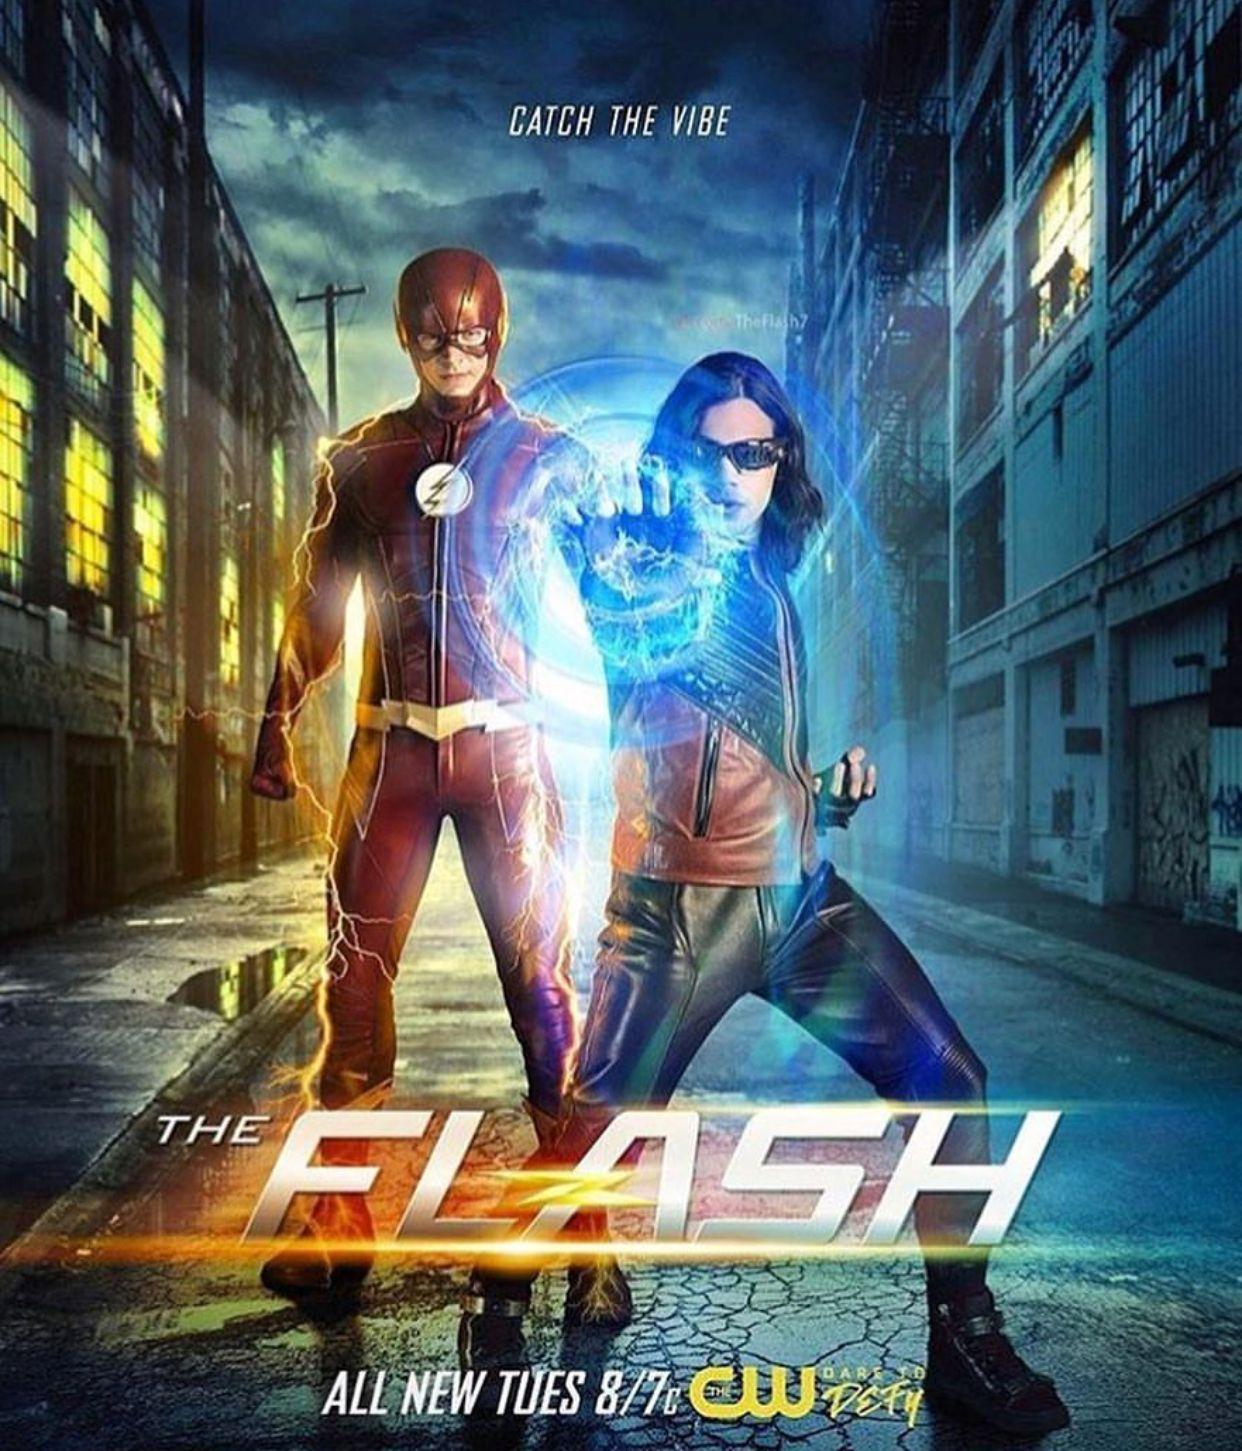 NEW!!! Poster from The Flash. THE FLASH in 2019